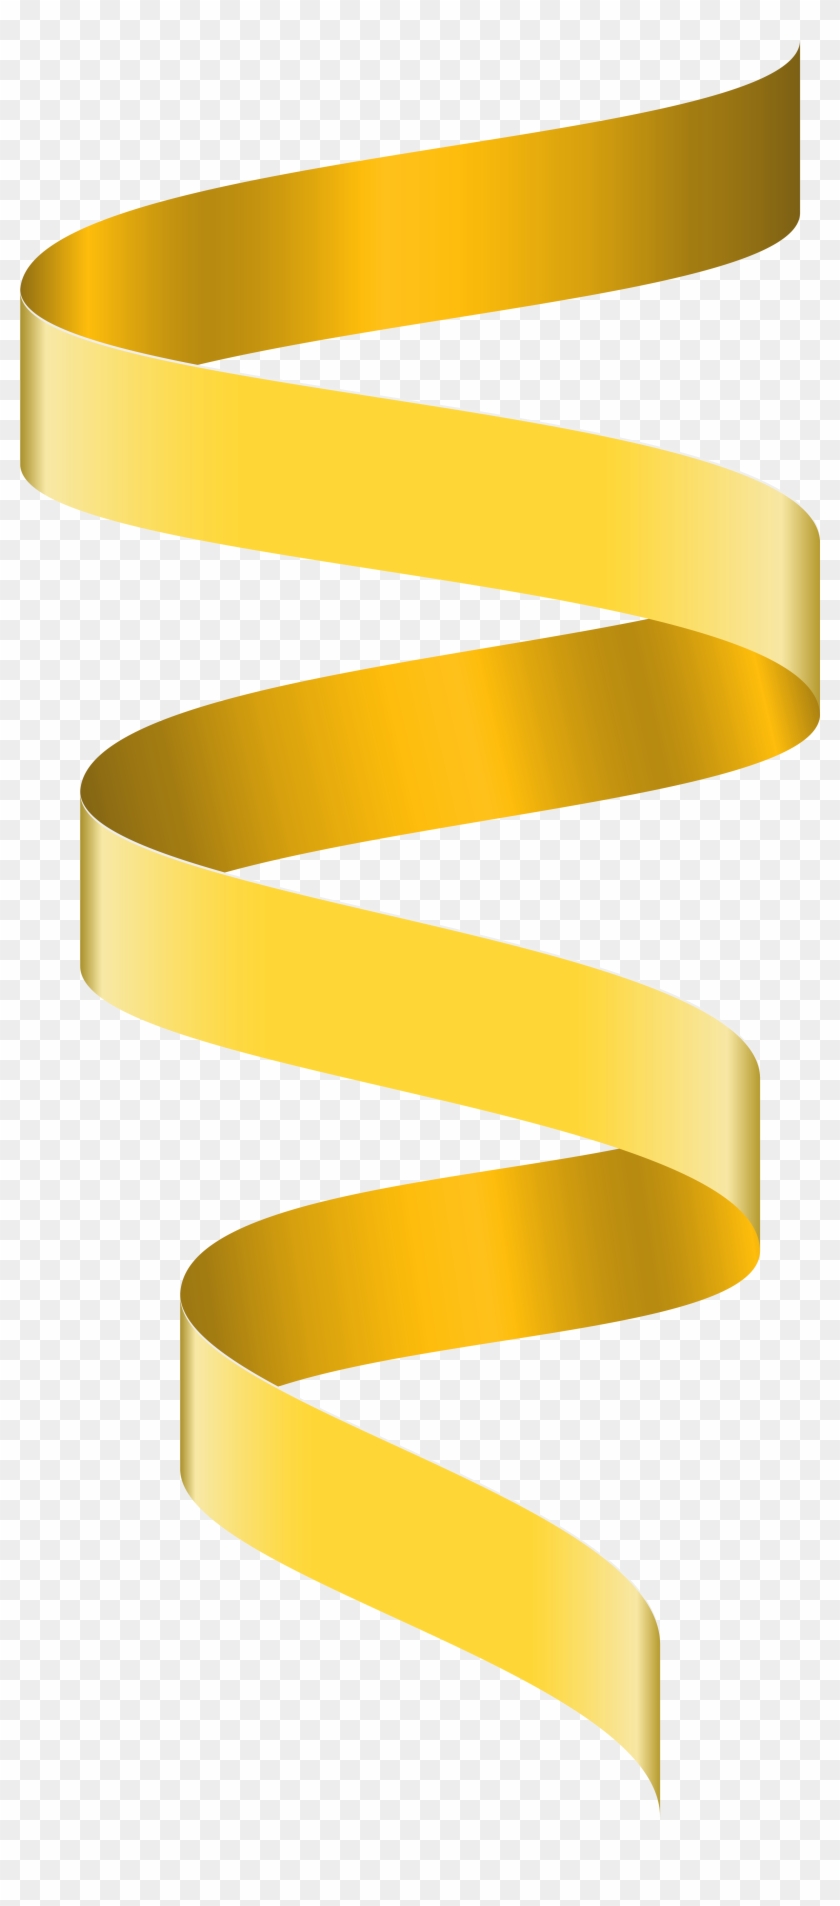 Curly Banner Ribbon Yellow Clipart Image - Parallel - Png Download #2417293